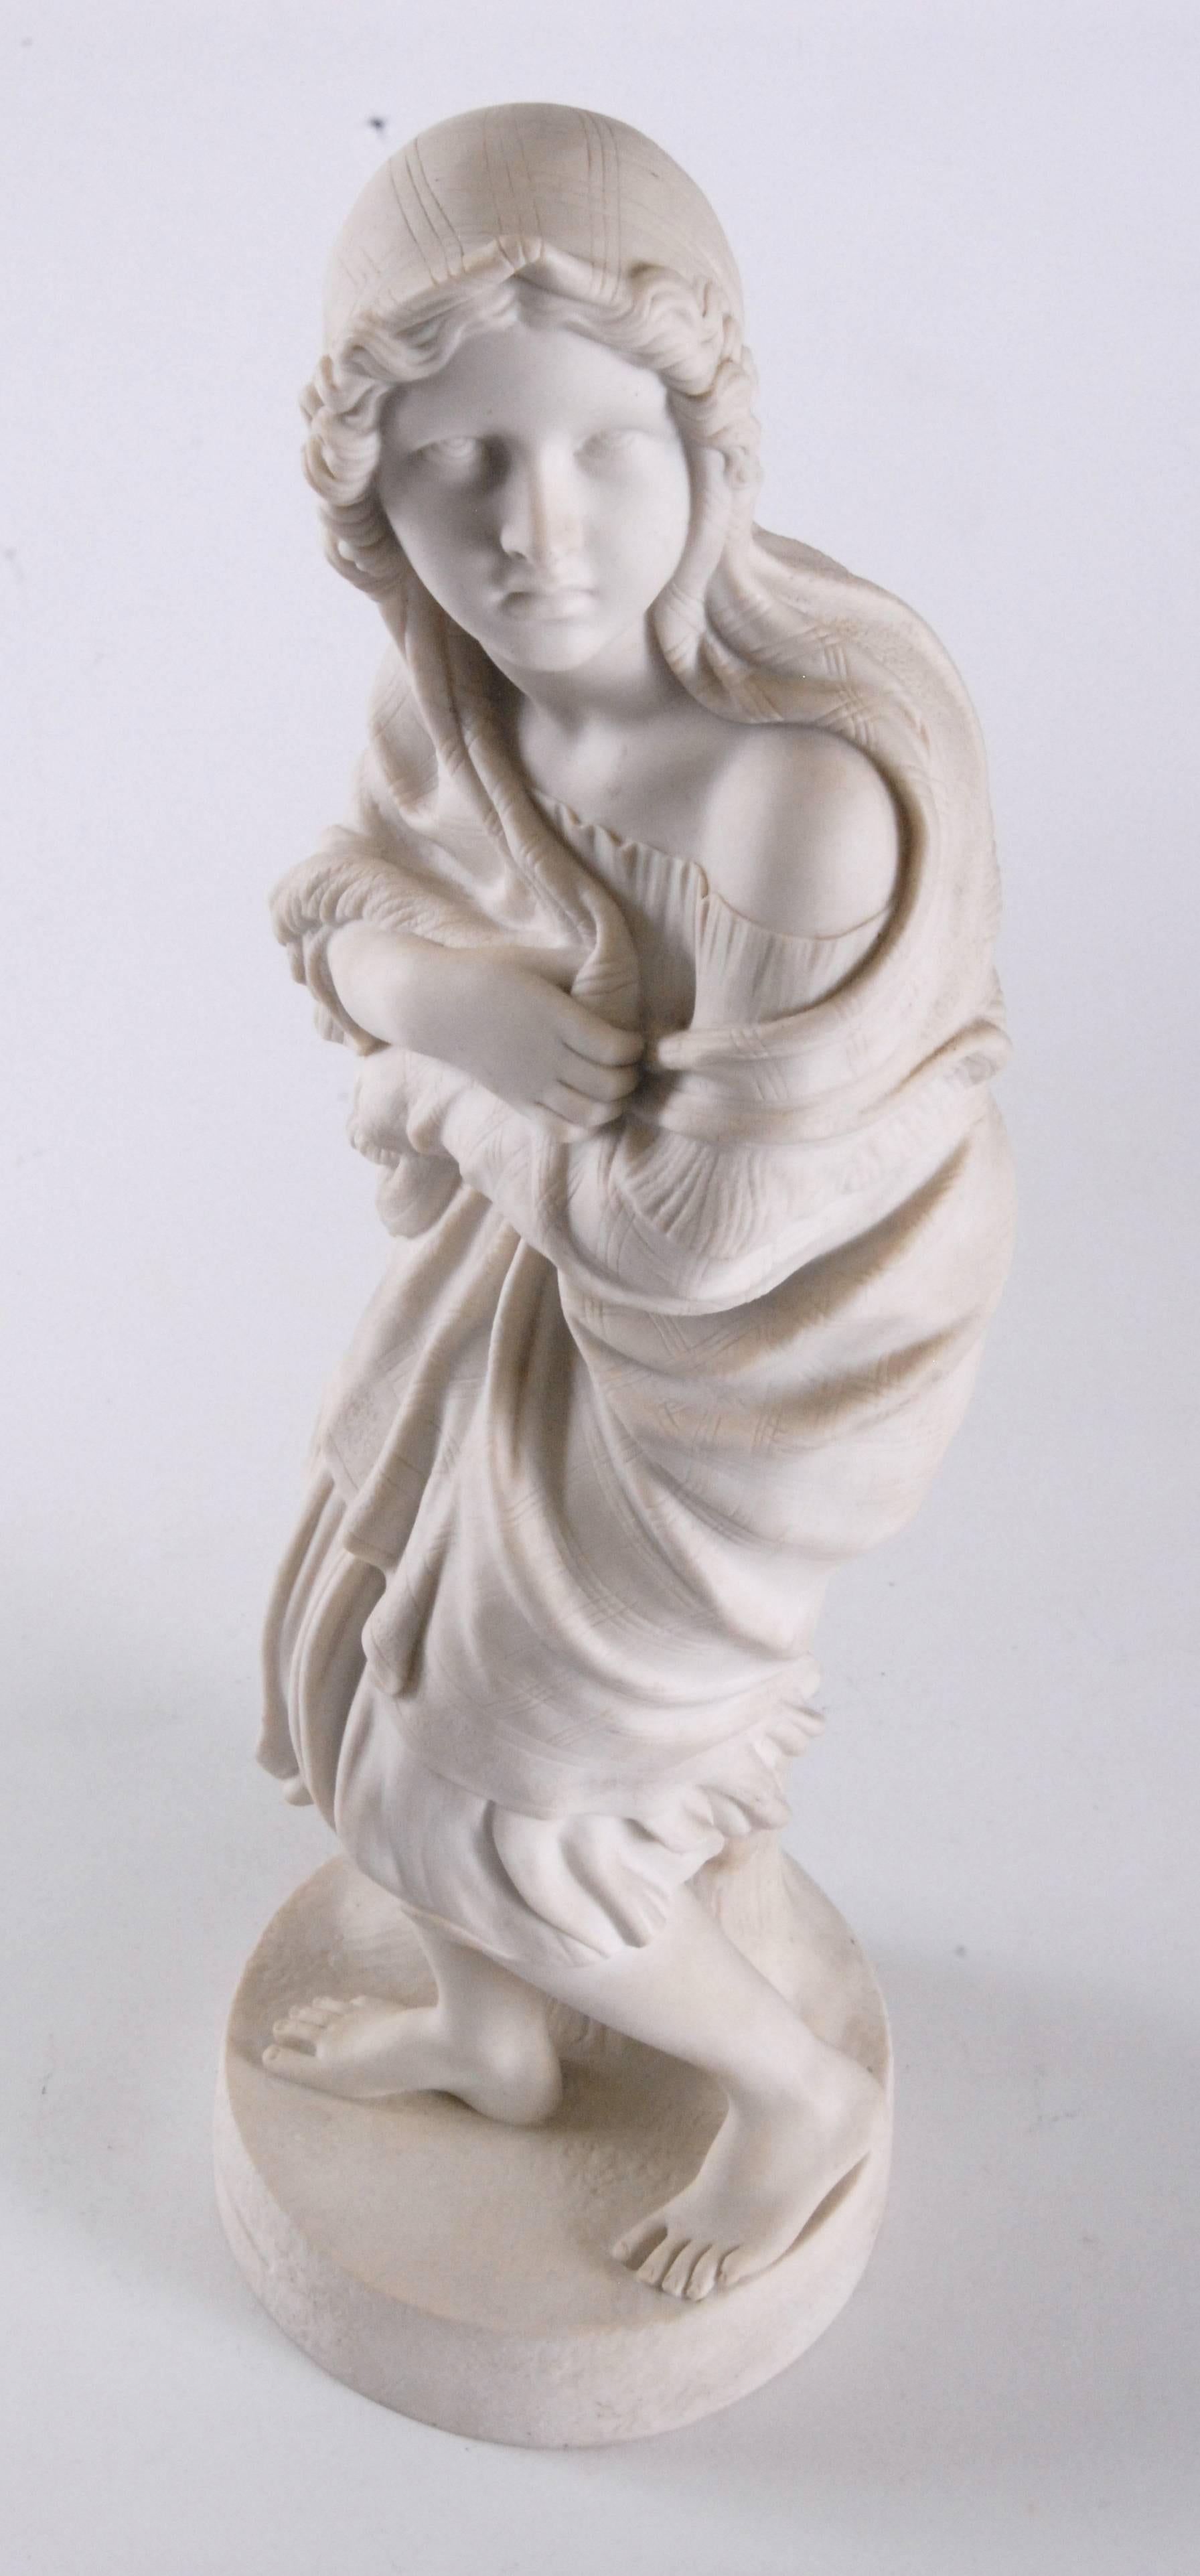 English 19th Century Copeland Parian Statue, 'Storm' by William Brodie, circa 1858 For Sale